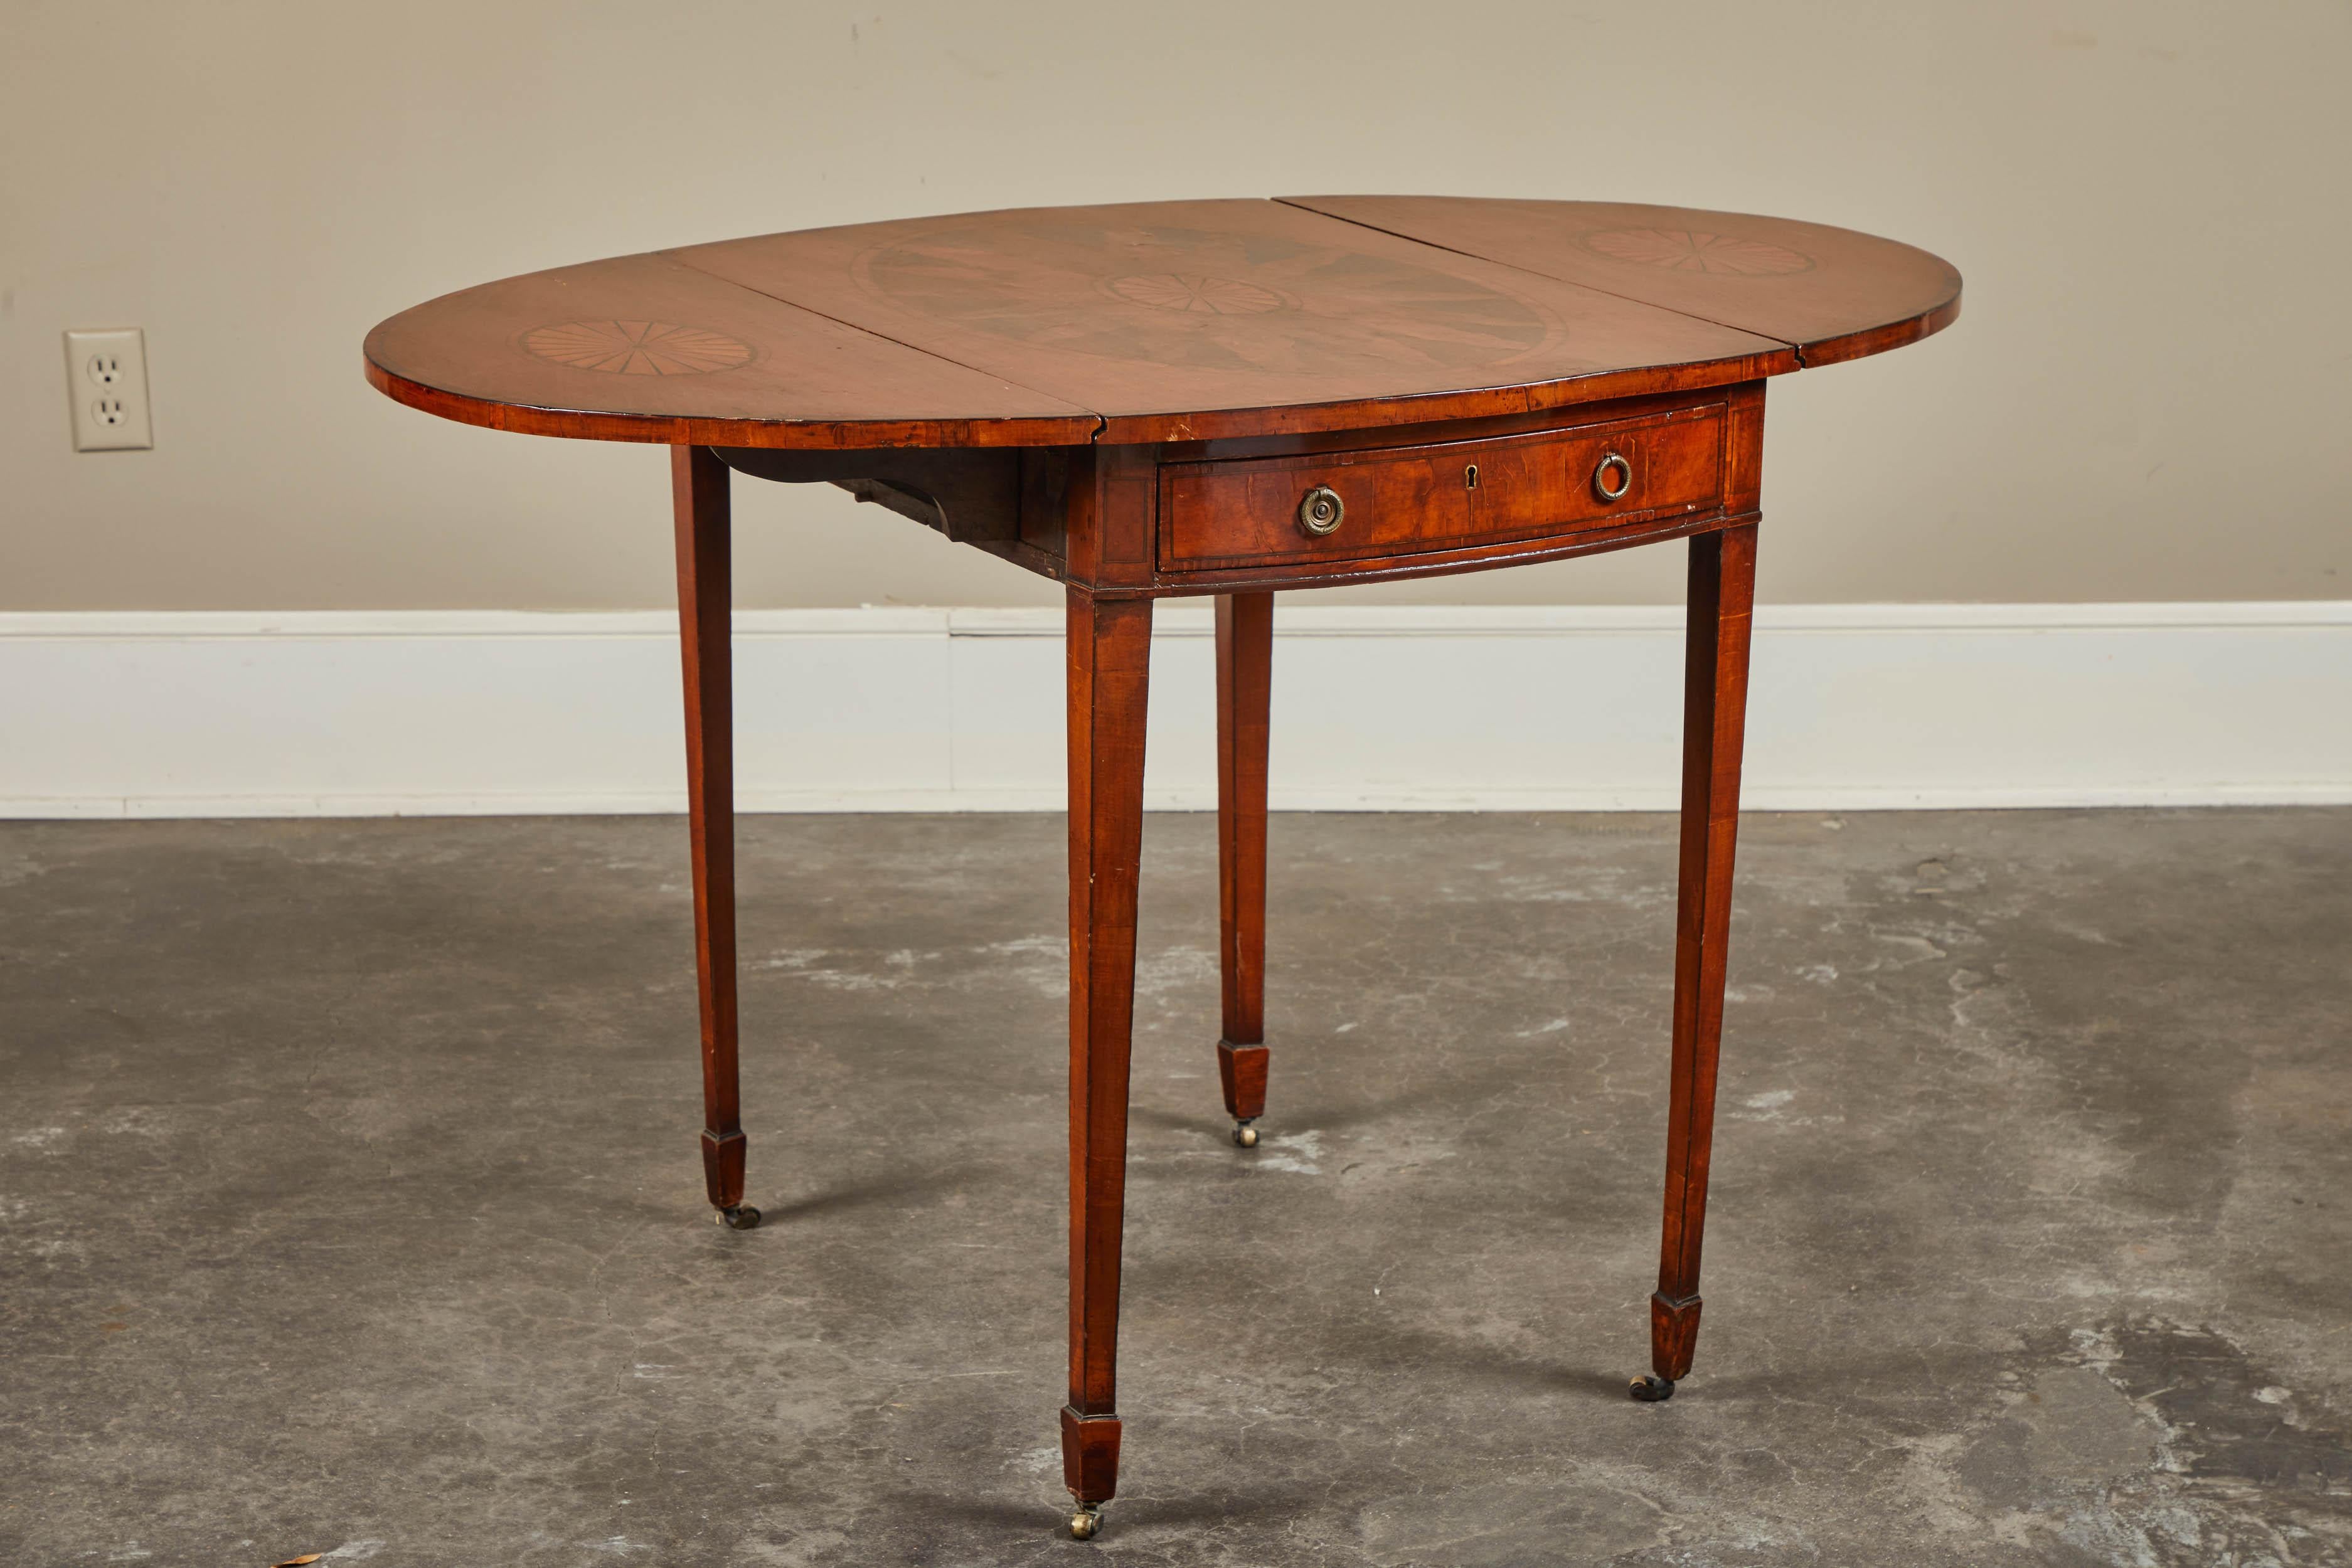 George III Pembroke table with inlaid top and drop-leaves, one working and one faux drawer, sitting on tapered legs with casters, 19th century.